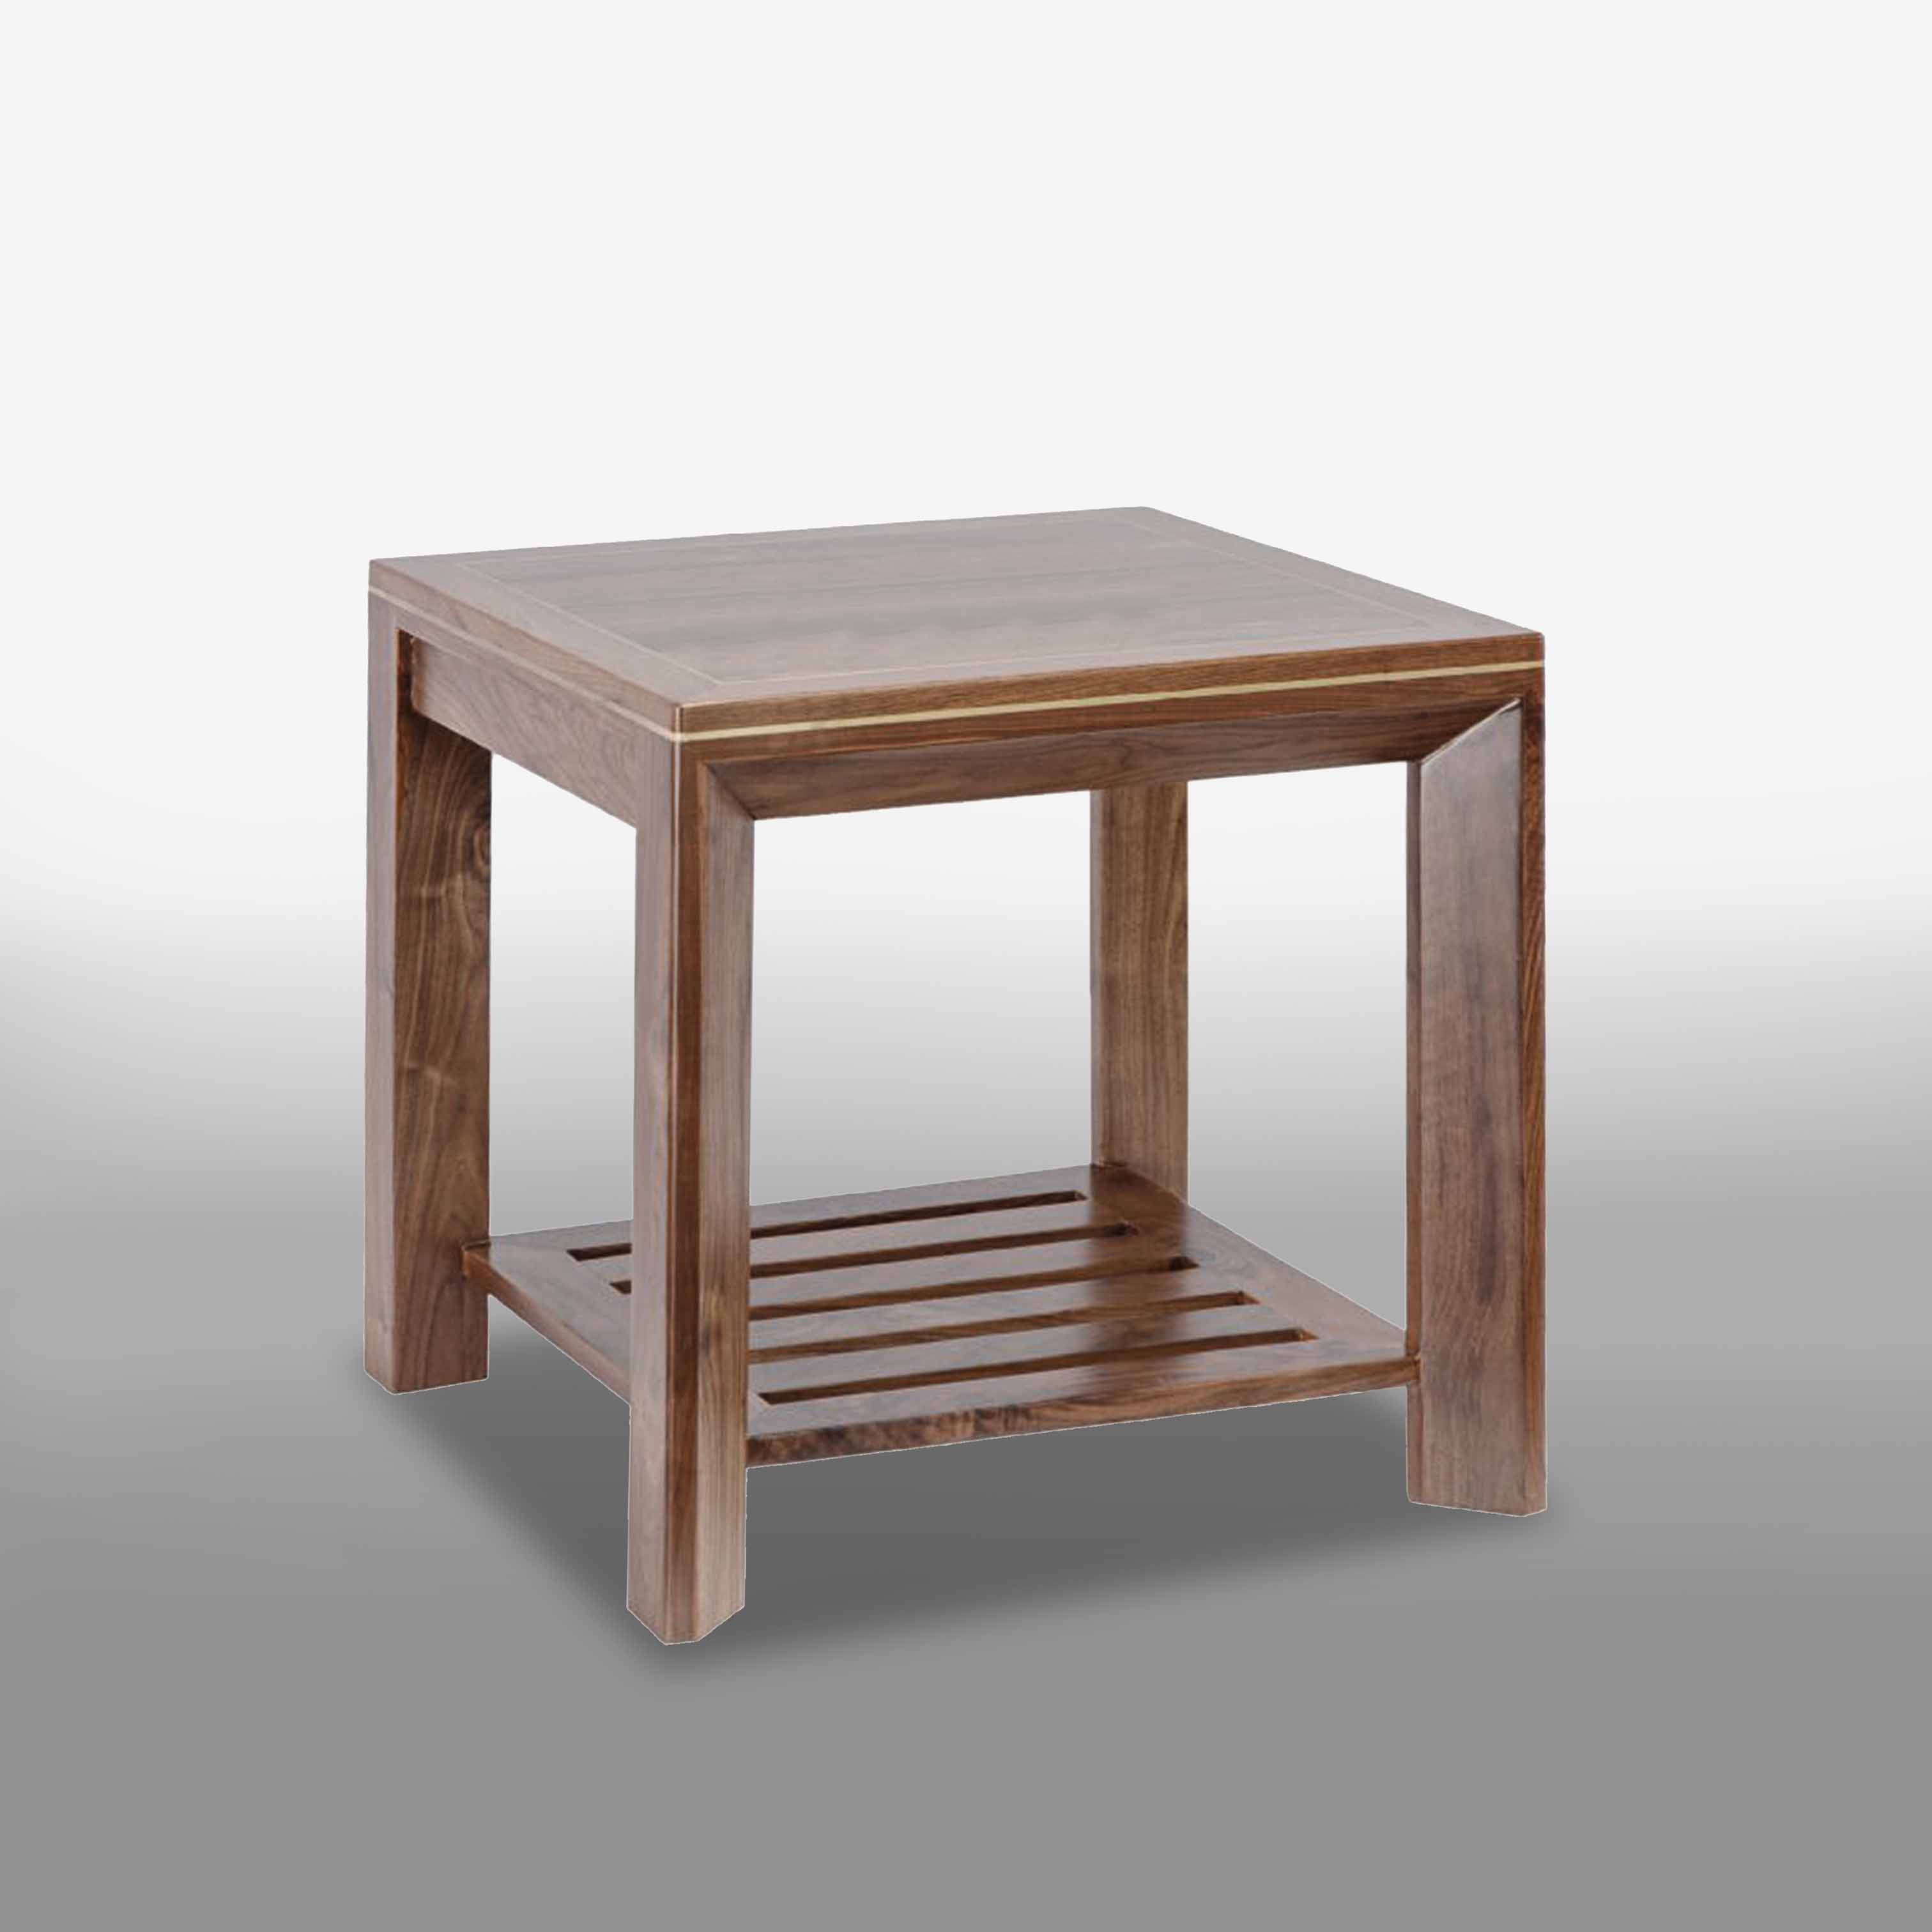 Noble square wooden table - B57LHFU